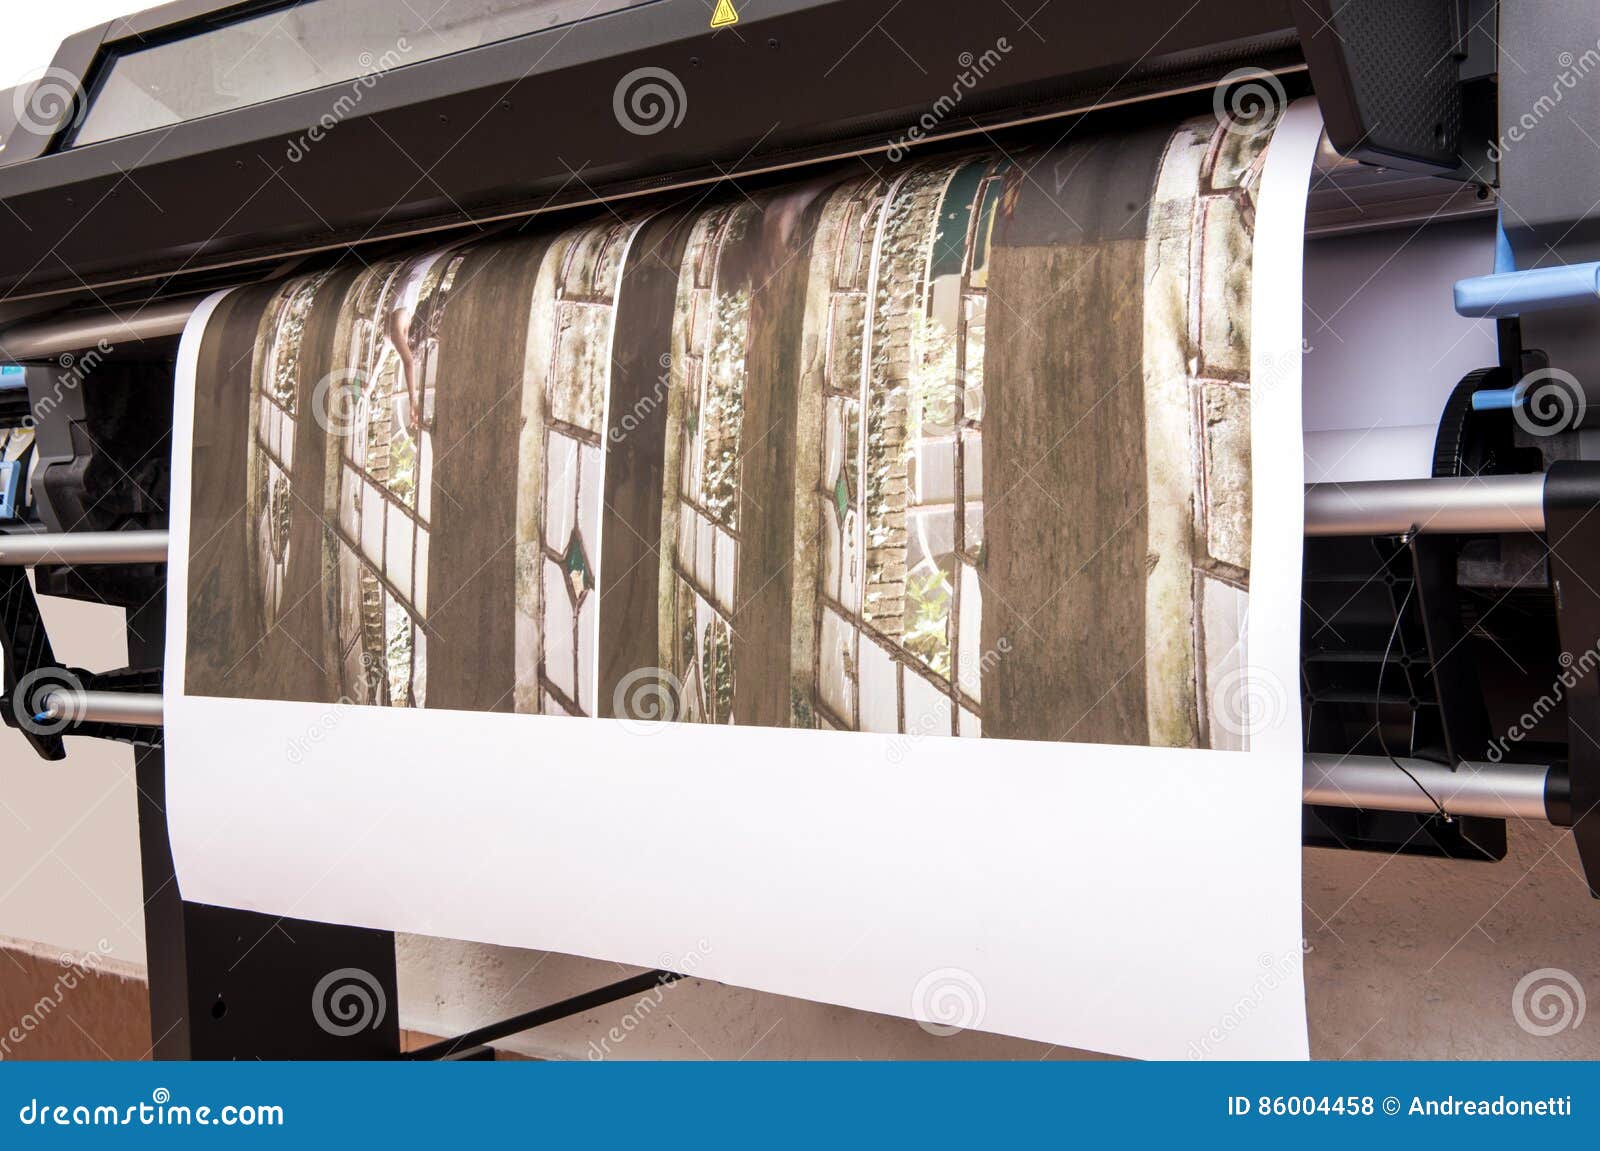 printing out large size photo